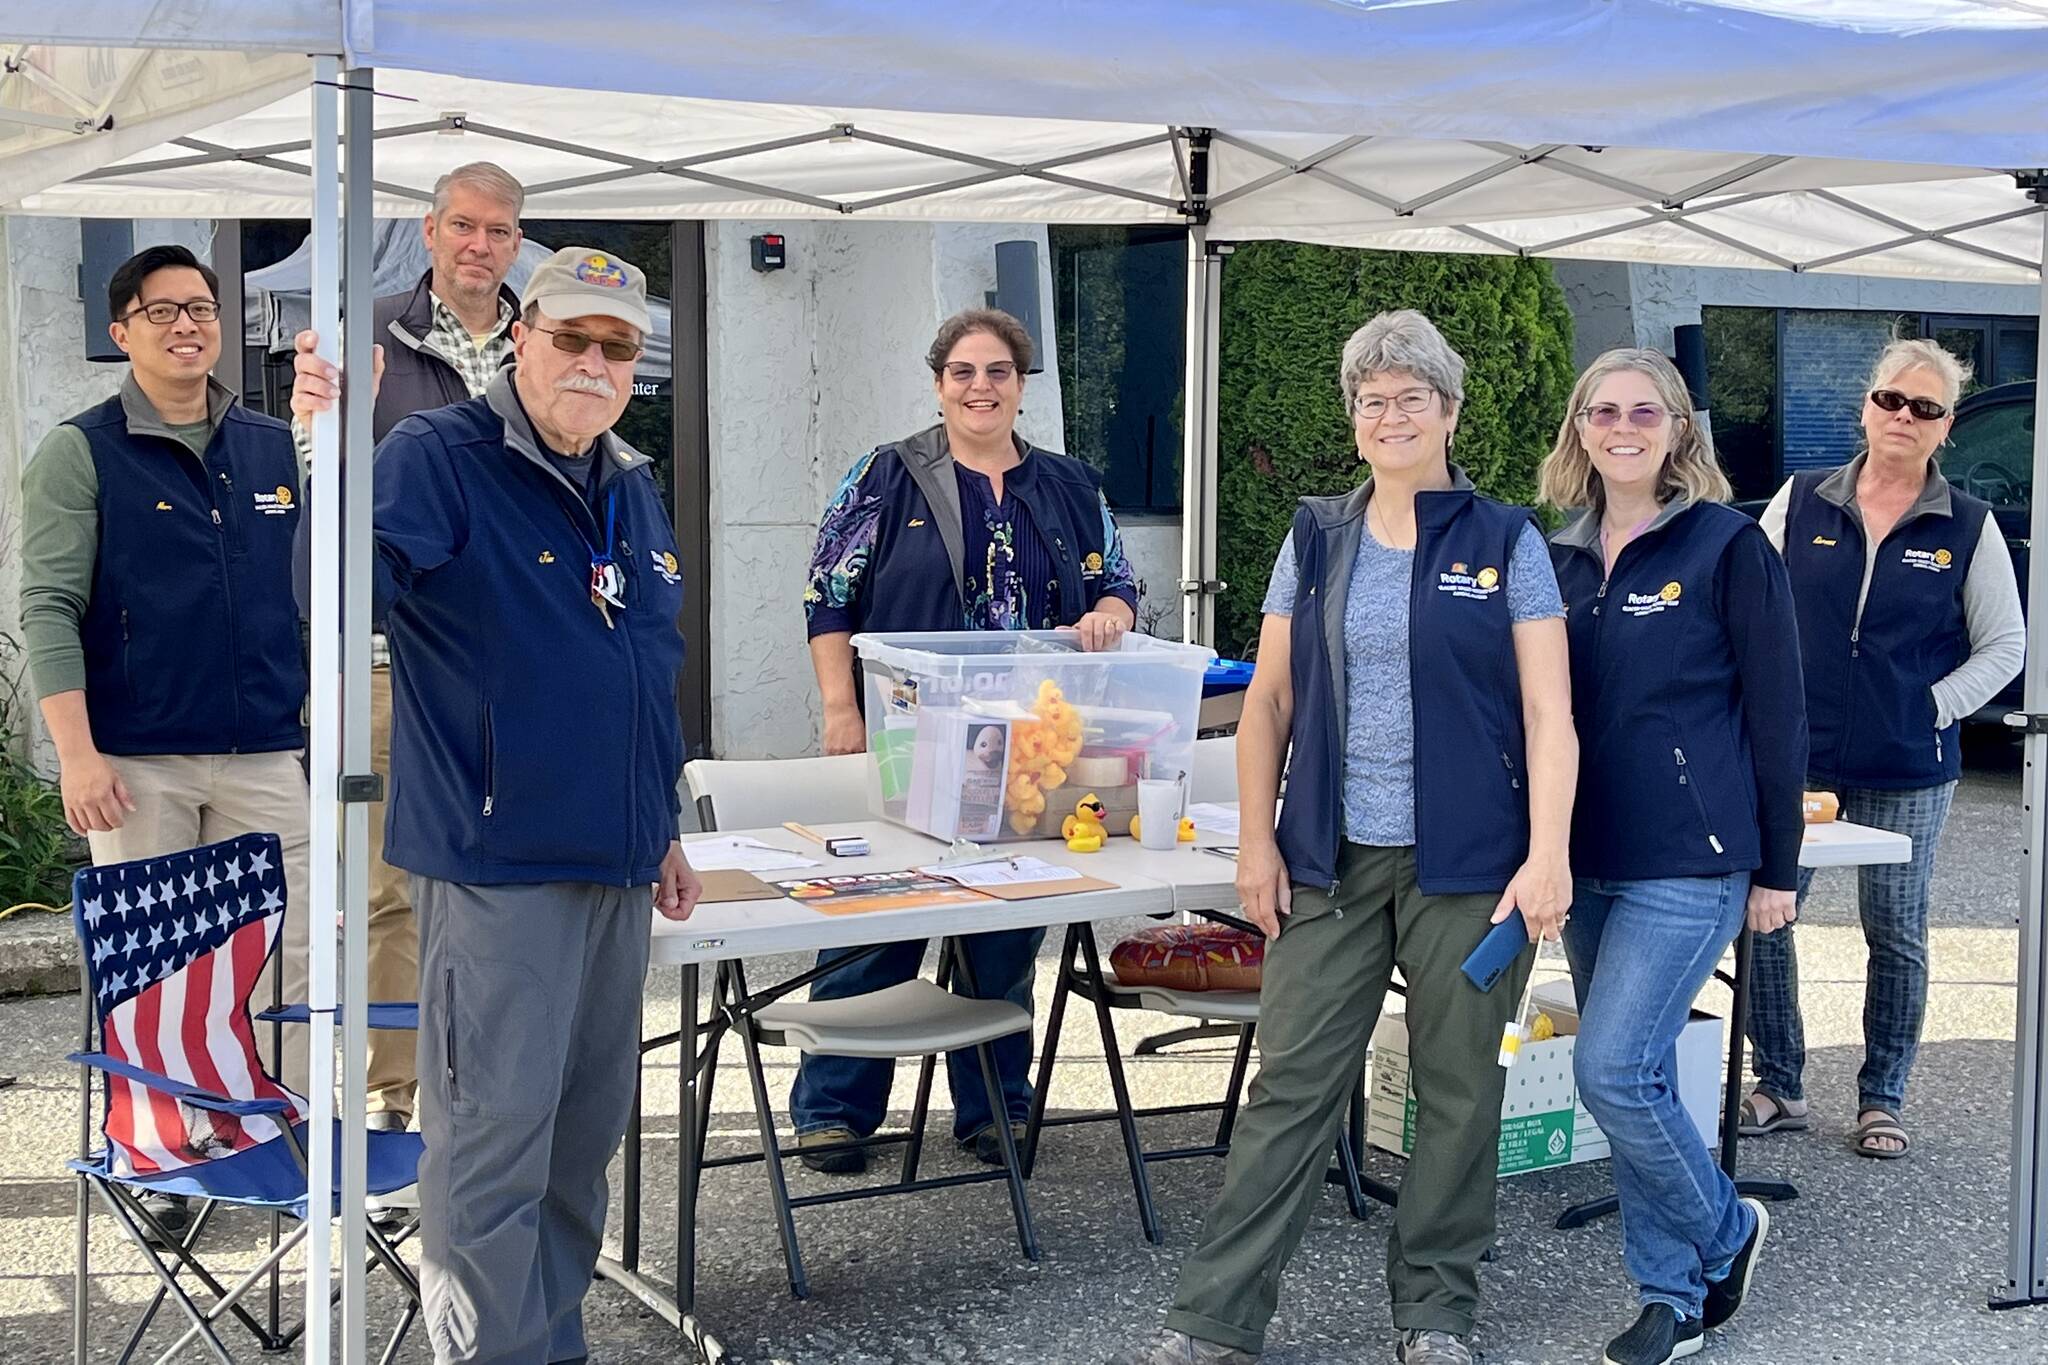 Jonson Kuhn / Juneau Empire
Glacier Valley Rotary Club Rotarians, shown in this Friday photo, set up at the Juneau Radio Center for their annual Duckless Raffle Fundraiser. The drawing takes place on Sept. 10 at 1 p.m.